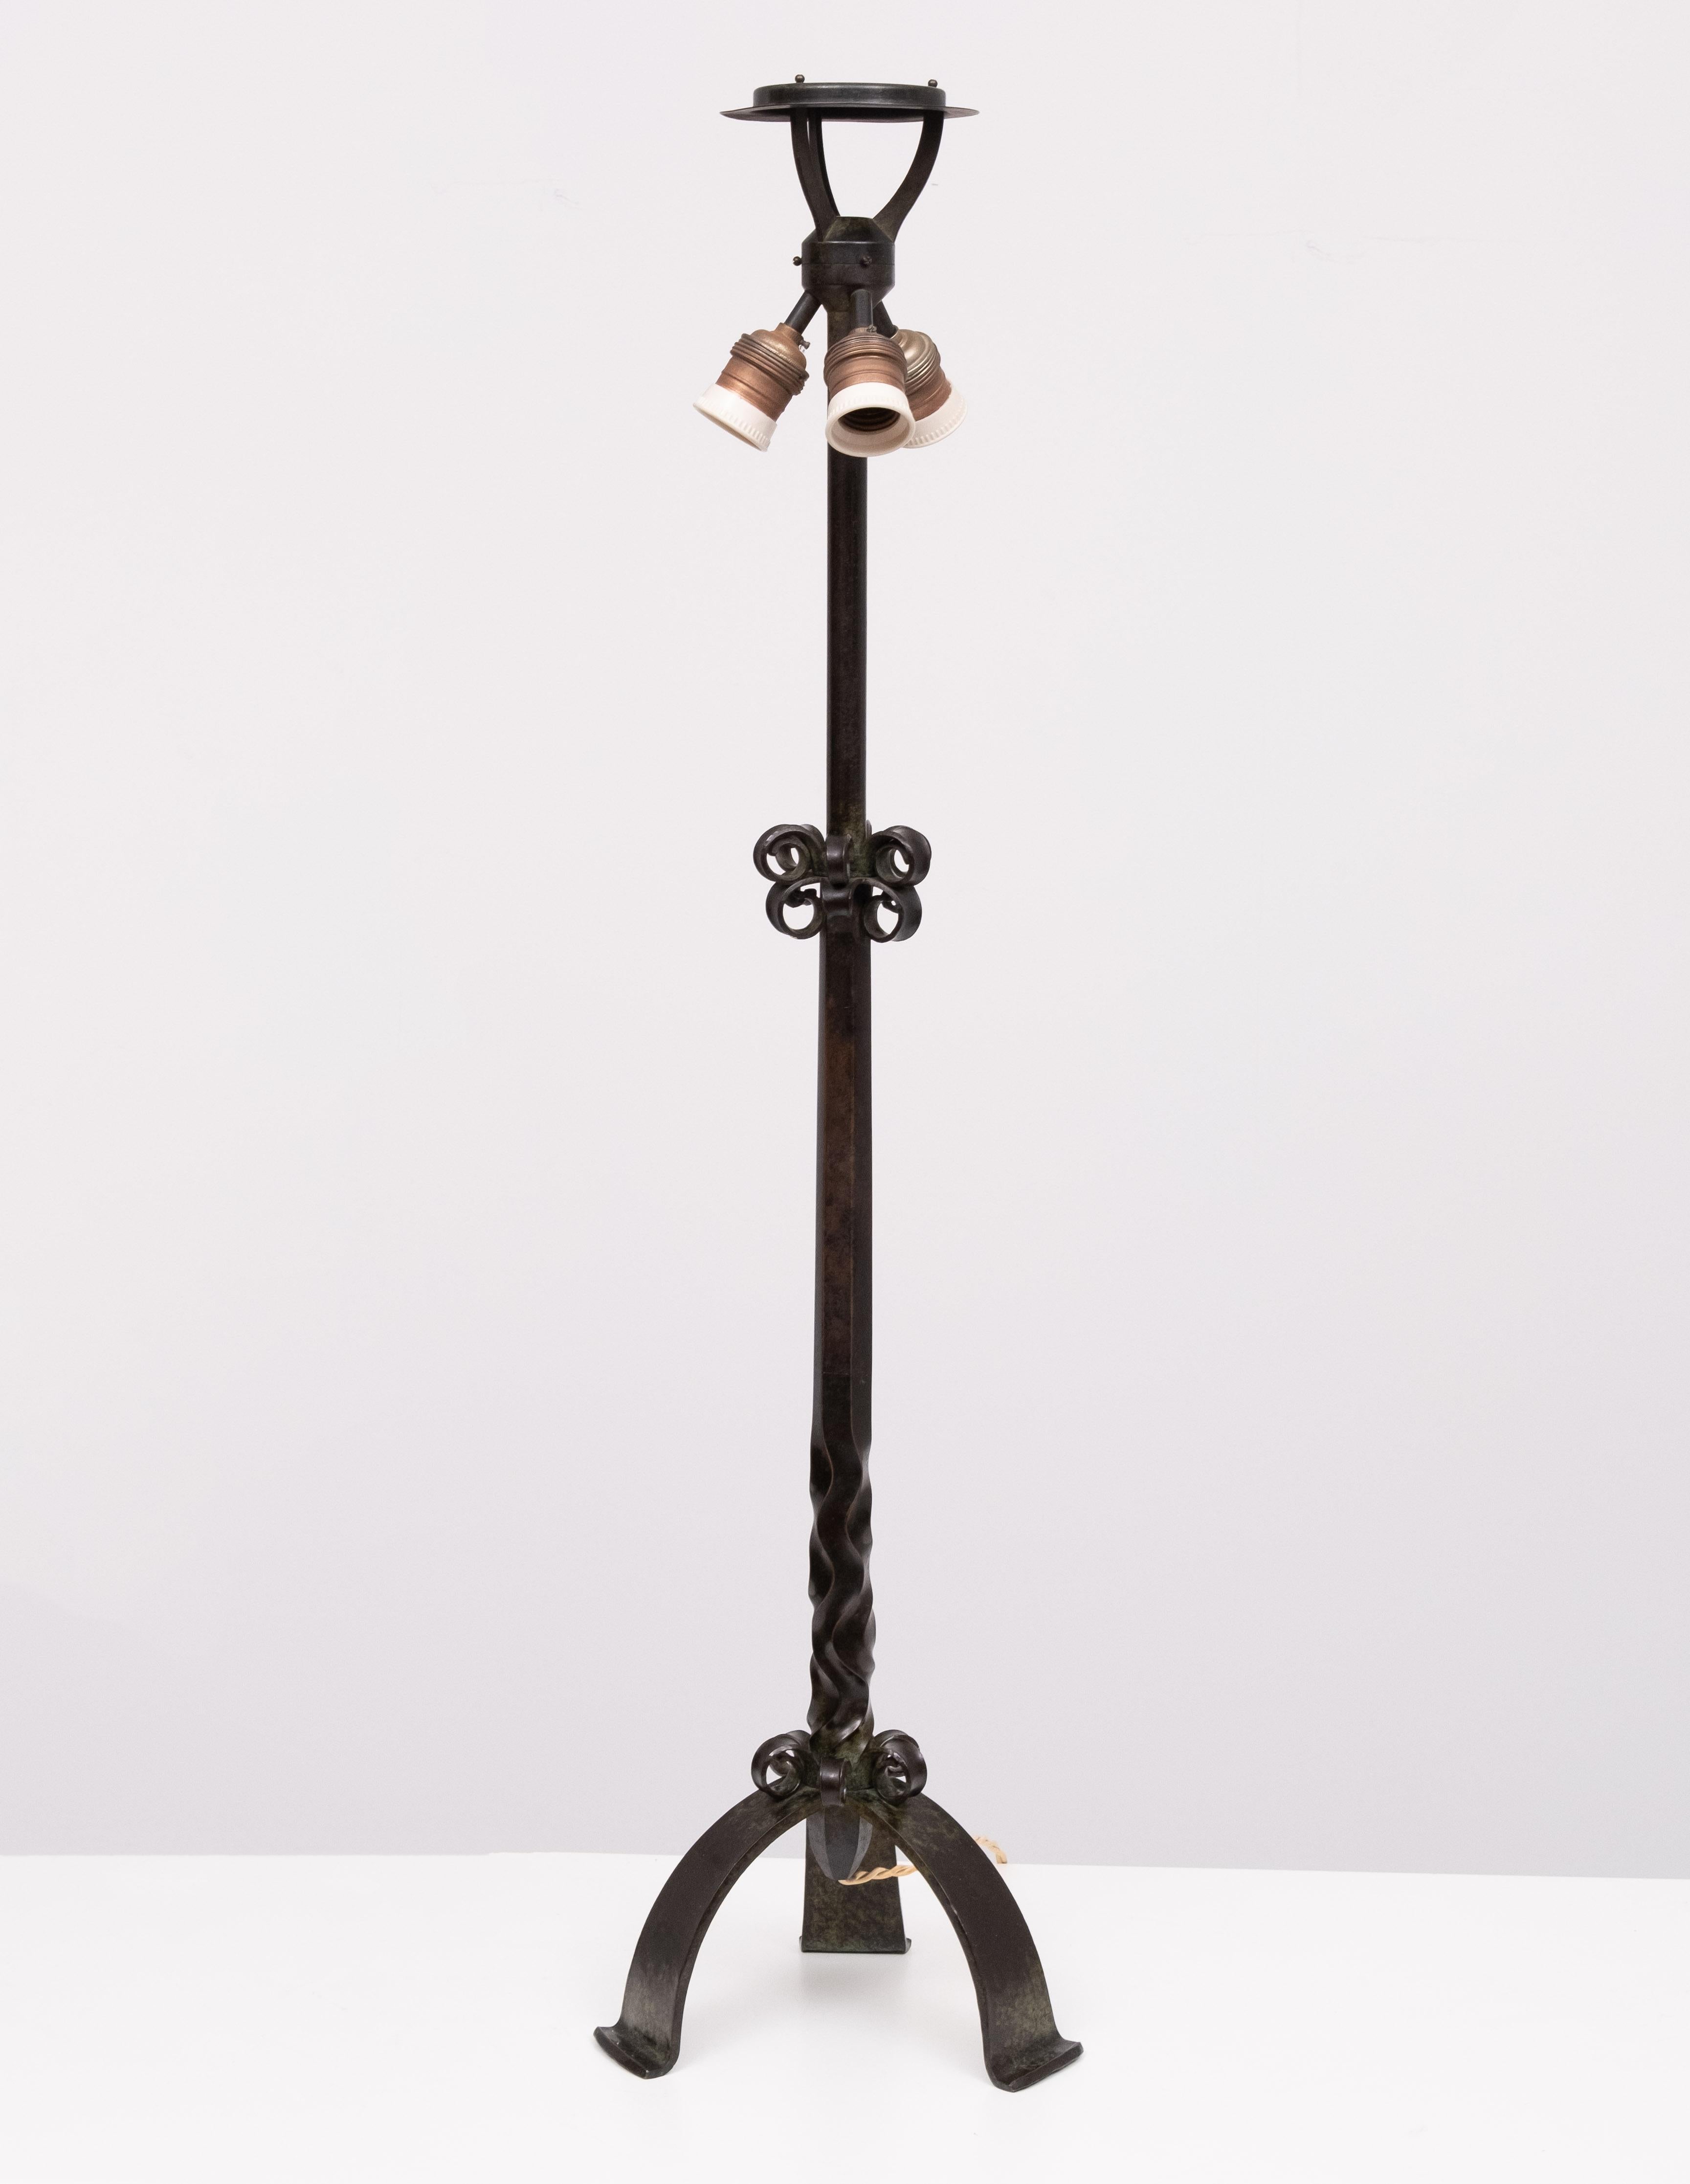 Unique Bronze handmade lamp stand . Manufactured and signed by 
Edelsmidse Brom .  Goldsmith Brom was a Dutch company, based in the city of Utrecht (1856-1961), specialized in making gold and silverware for the Roman Catholic Church. The company is